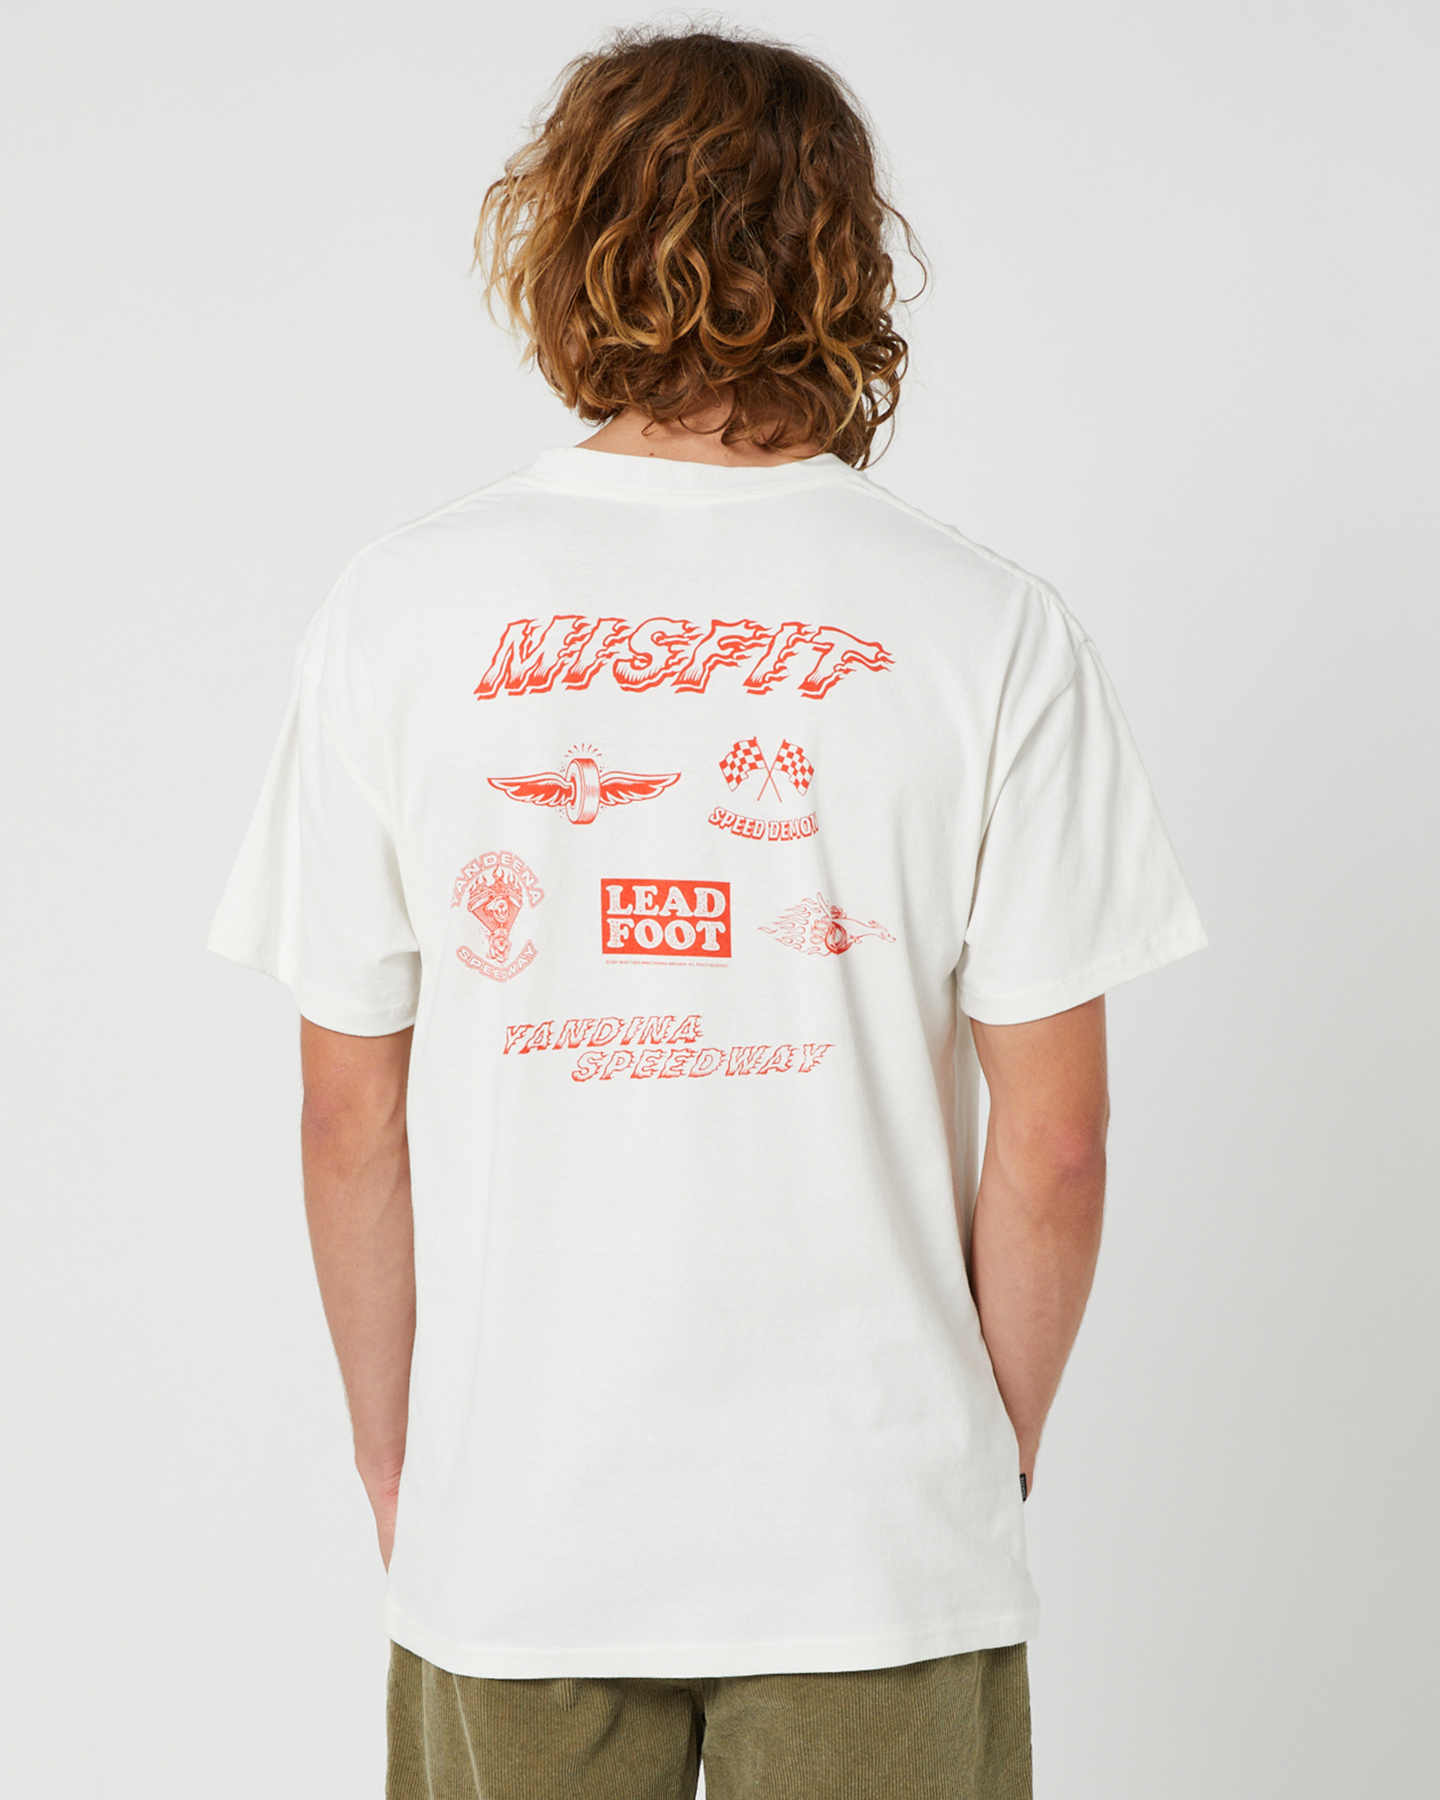 Misfit Yandina Core 50 50 Mens Ss Tee - Washed White | SurfStitch